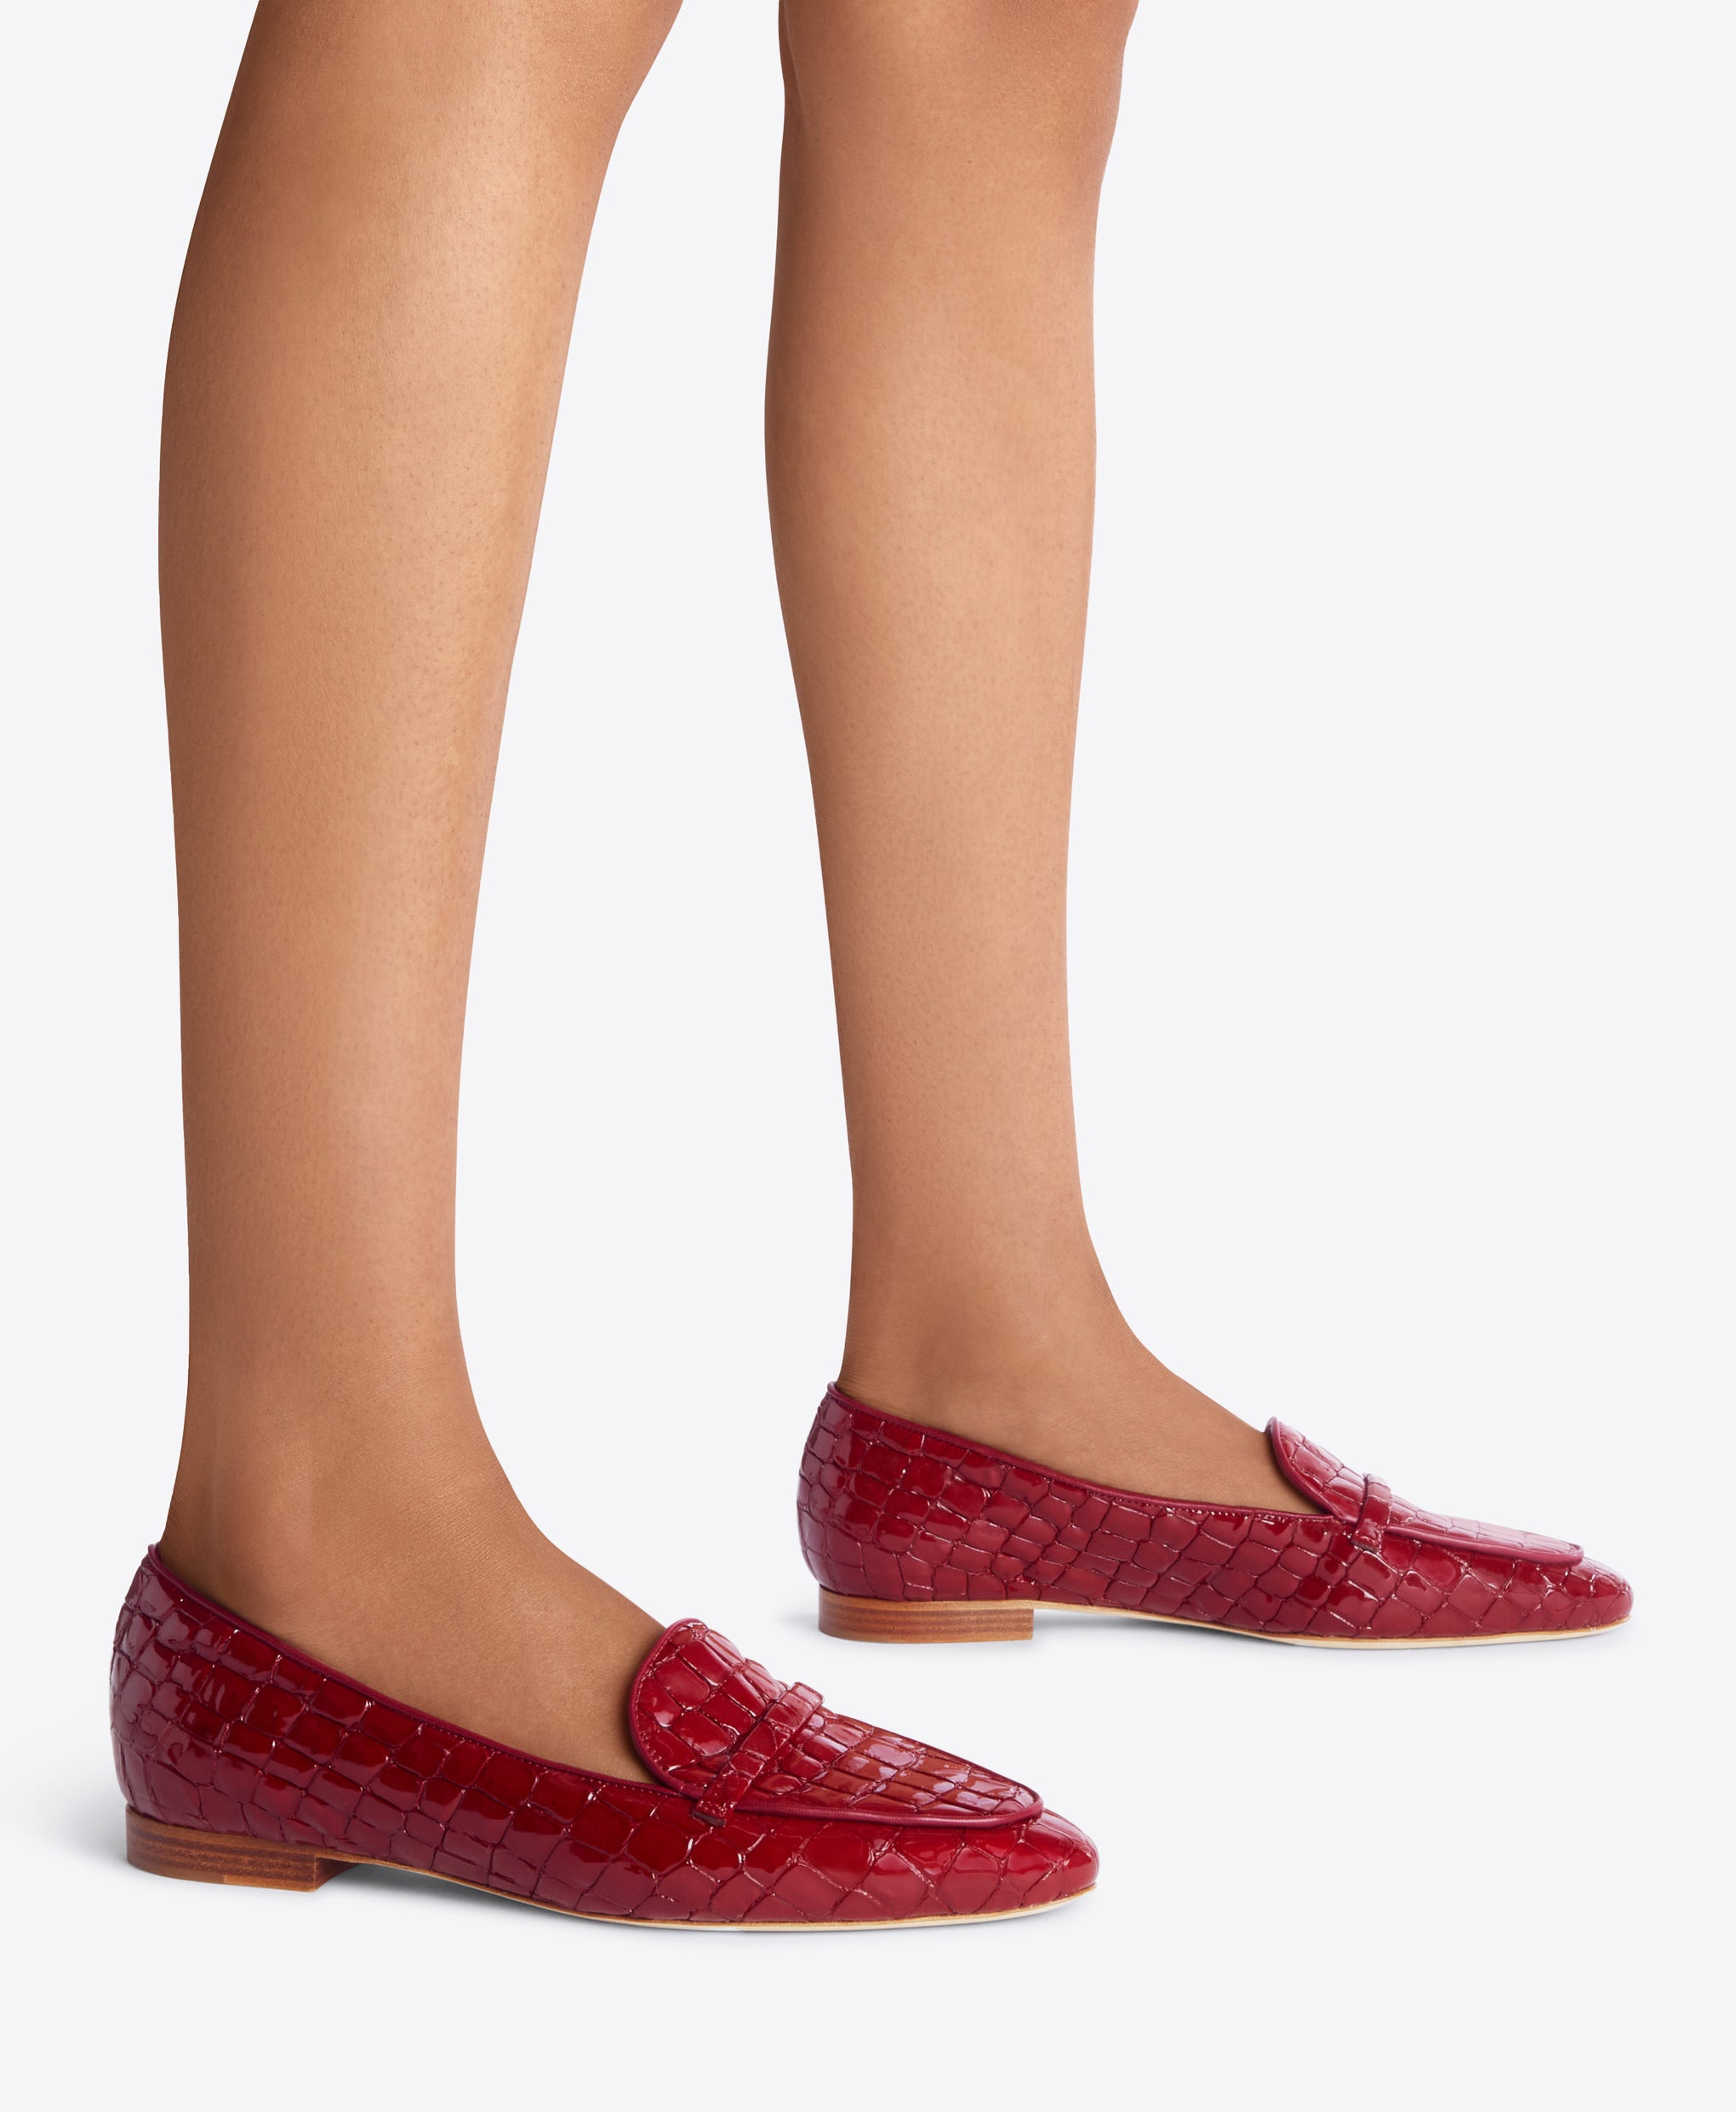 Burgundy Embossed Loafers - Almond Toe with Strap Detail on Monoblock | Malone Souliers